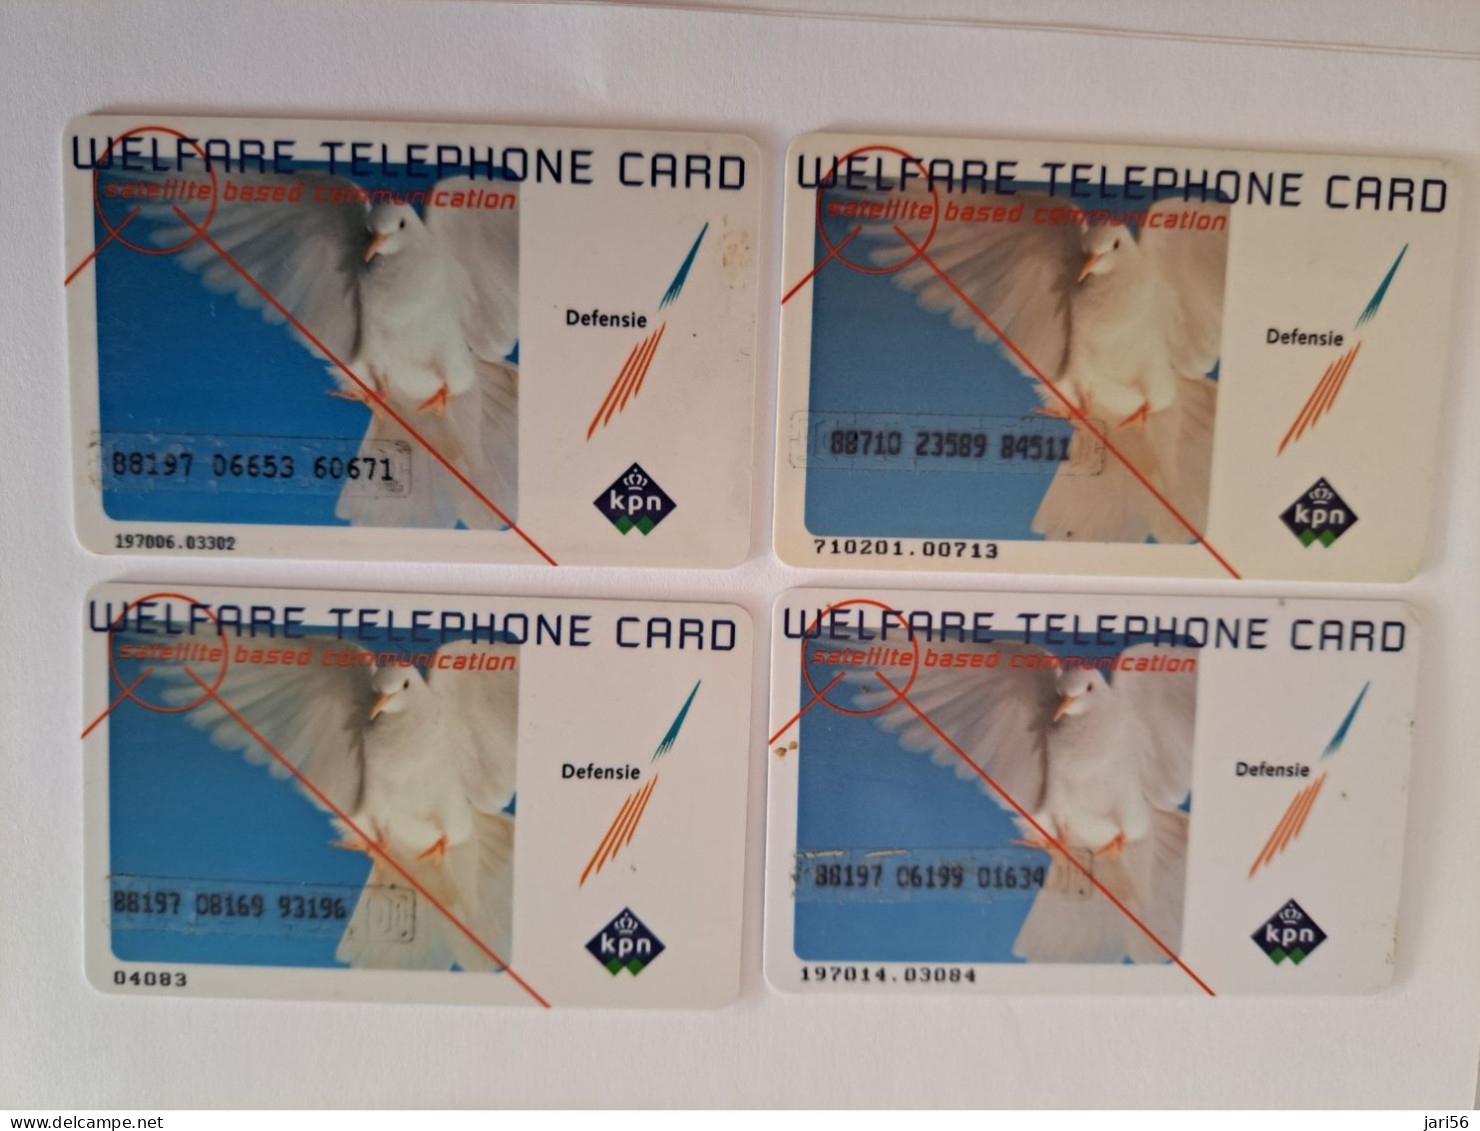 NETHERLANDS/ PREPAID/  HFL 25,- 4 CARDS/PIGEON  / WELFARE/ MILITAIRE CARDS/QUARTED / COMPLETE   - USED CARD  ** 13944** - [3] Sim Cards, Prepaid & Refills